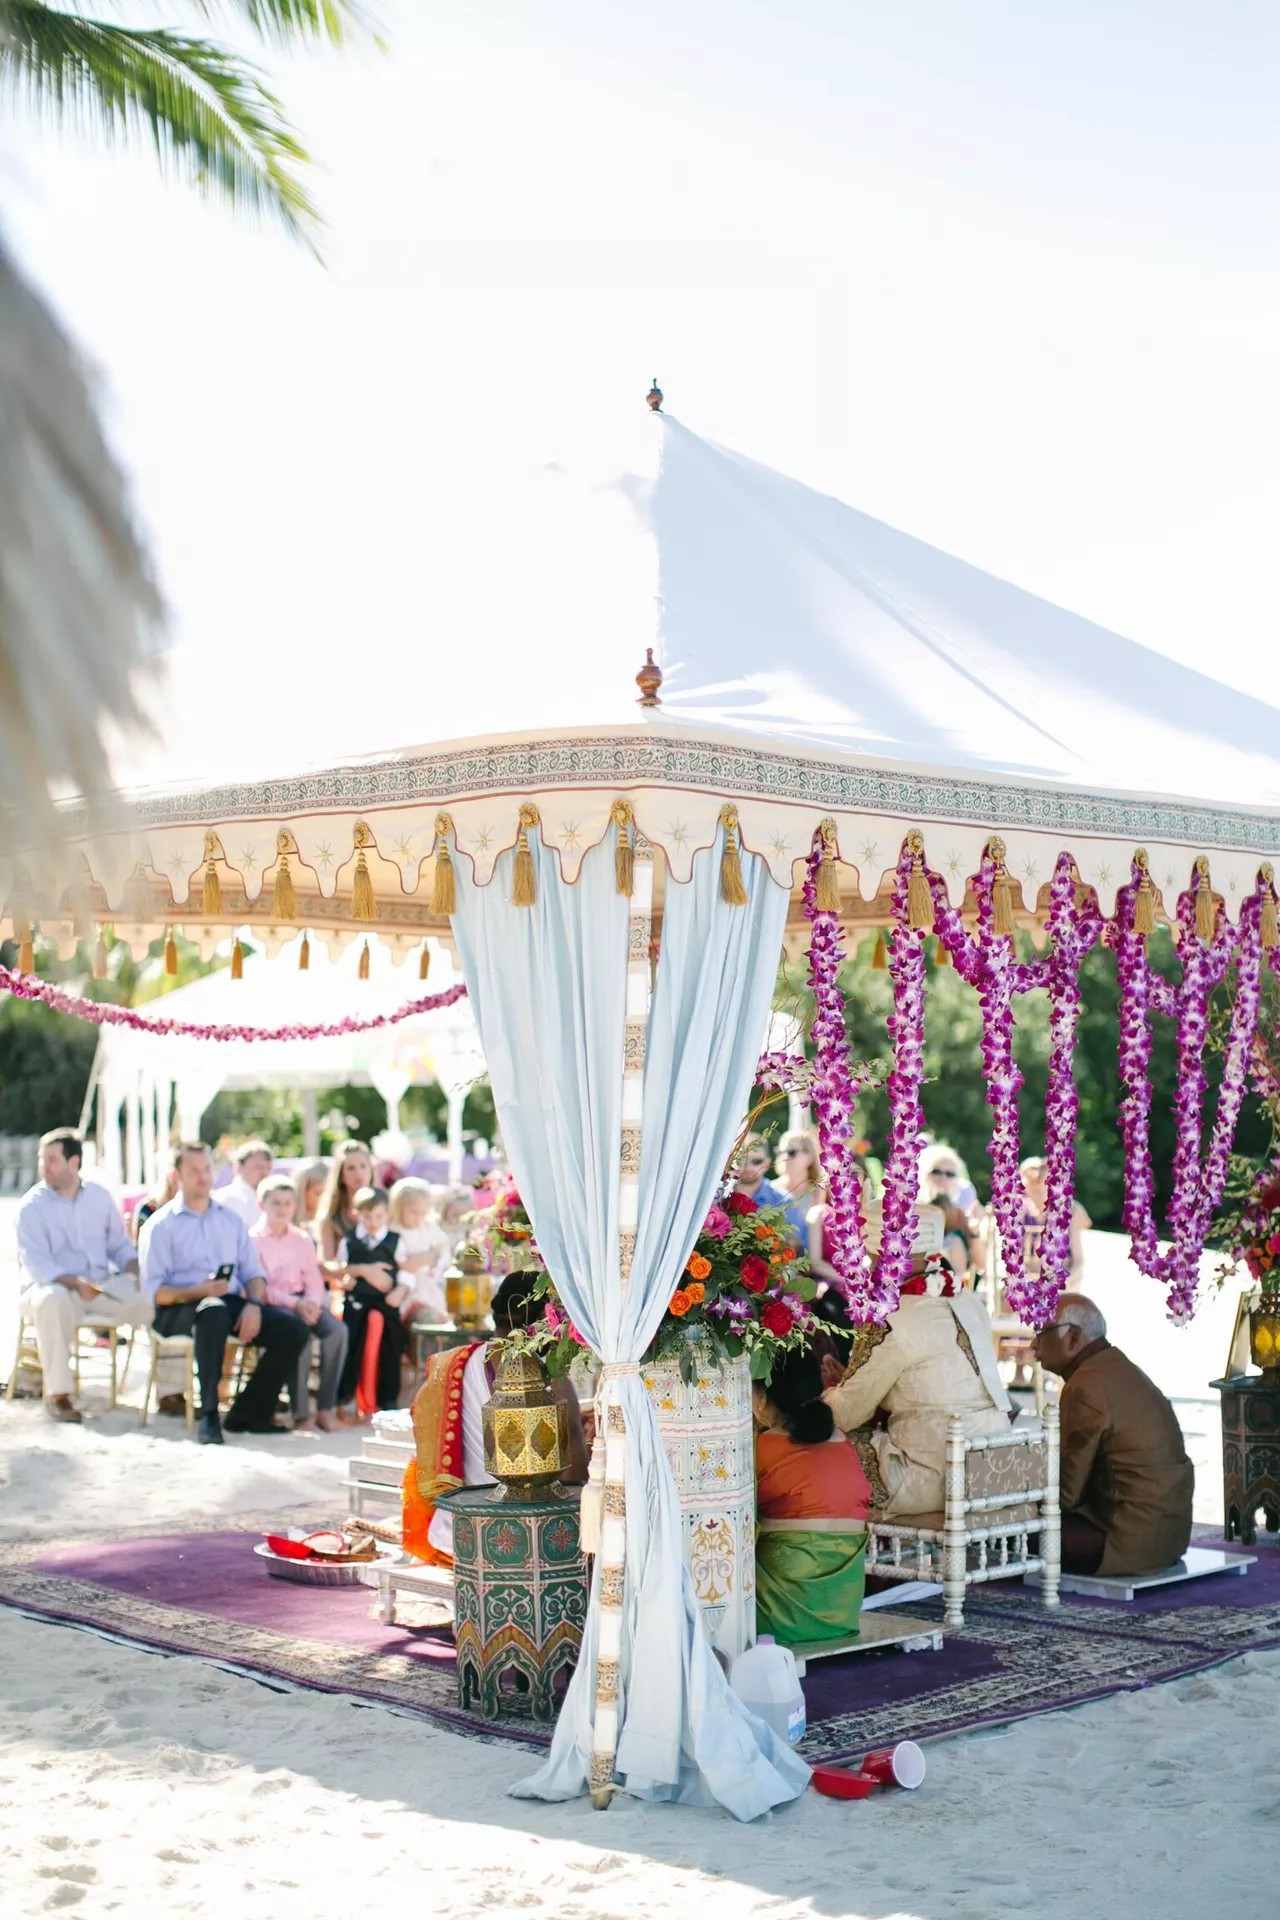 Get Inspired By These Awesome Indian Wedding Mandap Ideas For Hindu Wedding Ceremonies